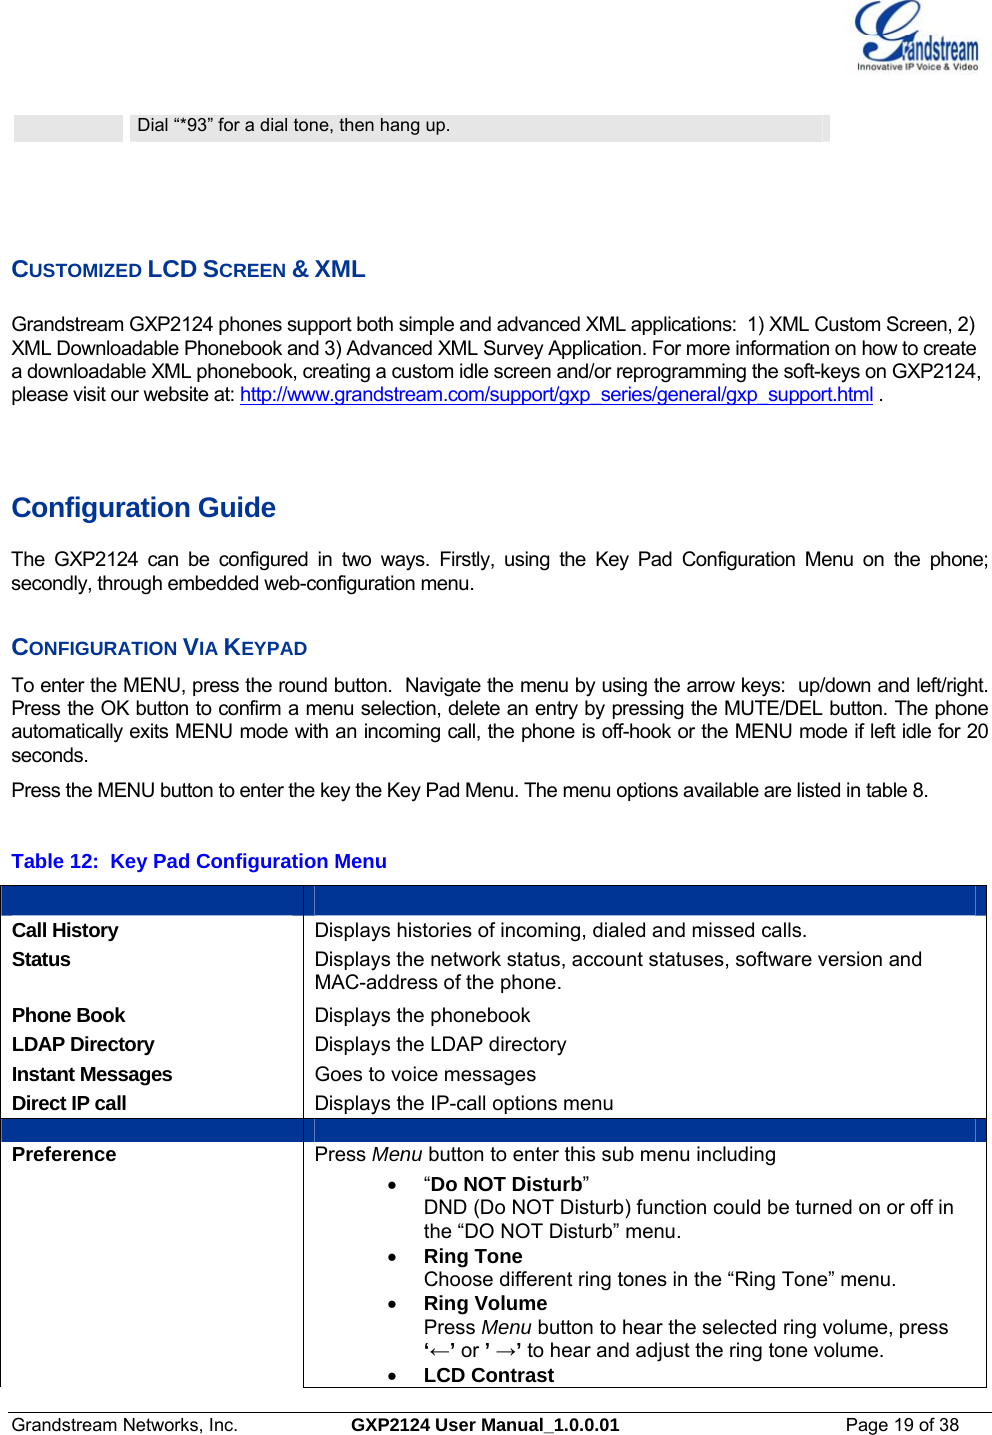  Grandstream Networks, Inc.  GXP2124 User Manual_1.0.0.01  Page 19 of 38                                                                                                                      Dial “*93” for a dial tone, then hang up.    CUSTOMIZED LCD SCREEN &amp; XML  Grandstream GXP2124 phones support both simple and advanced XML applications:  1) XML Custom Screen, 2) XML Downloadable Phonebook and 3) Advanced XML Survey Application. For more information on how to create a downloadable XML phonebook, creating a custom idle screen and/or reprogramming the soft-keys on GXP2124, please visit our website at: http://www.grandstream.com/support/gxp_series/general/gxp_support.html .     Configuration Guide The GXP2124 can be configured in two ways. Firstly, using the Key Pad Configuration Menu on the phone; secondly, through embedded web-configuration menu.  CONFIGURATION VIA KEYPAD To enter the MENU, press the round button.  Navigate the menu by using the arrow keys:  up/down and left/right.  Press the OK button to confirm a menu selection, delete an entry by pressing the MUTE/DEL button. The phone automatically exits MENU mode with an incoming call, the phone is off-hook or the MENU mode if left idle for 20 seconds. Press the MENU button to enter the key the Key Pad Menu. The menu options available are listed in table 8.  Table 12:  Key Pad Configuration Menu    Call History   Displays histories of incoming, dialed and missed calls. Status  Displays the network status, account statuses, software version and MAC-address of the phone. Phone Book  Displays the phonebook LDAP Directory  Displays the LDAP directory Instant Messages  Goes to voice messages Direct IP call  Displays the IP-call options menu    Preference Press Menu button to enter this sub menu including  • “Do NOT Disturb”  DND (Do NOT Disturb) function could be turned on or off in the “DO NOT Disturb” menu. • Ring Tone Choose different ring tones in the “Ring Tone” menu. • Ring Volume Press Menu button to hear the selected ring volume, press ‘←’ or ’ →’ to hear and adjust the ring tone volume. • LCD Contrast 